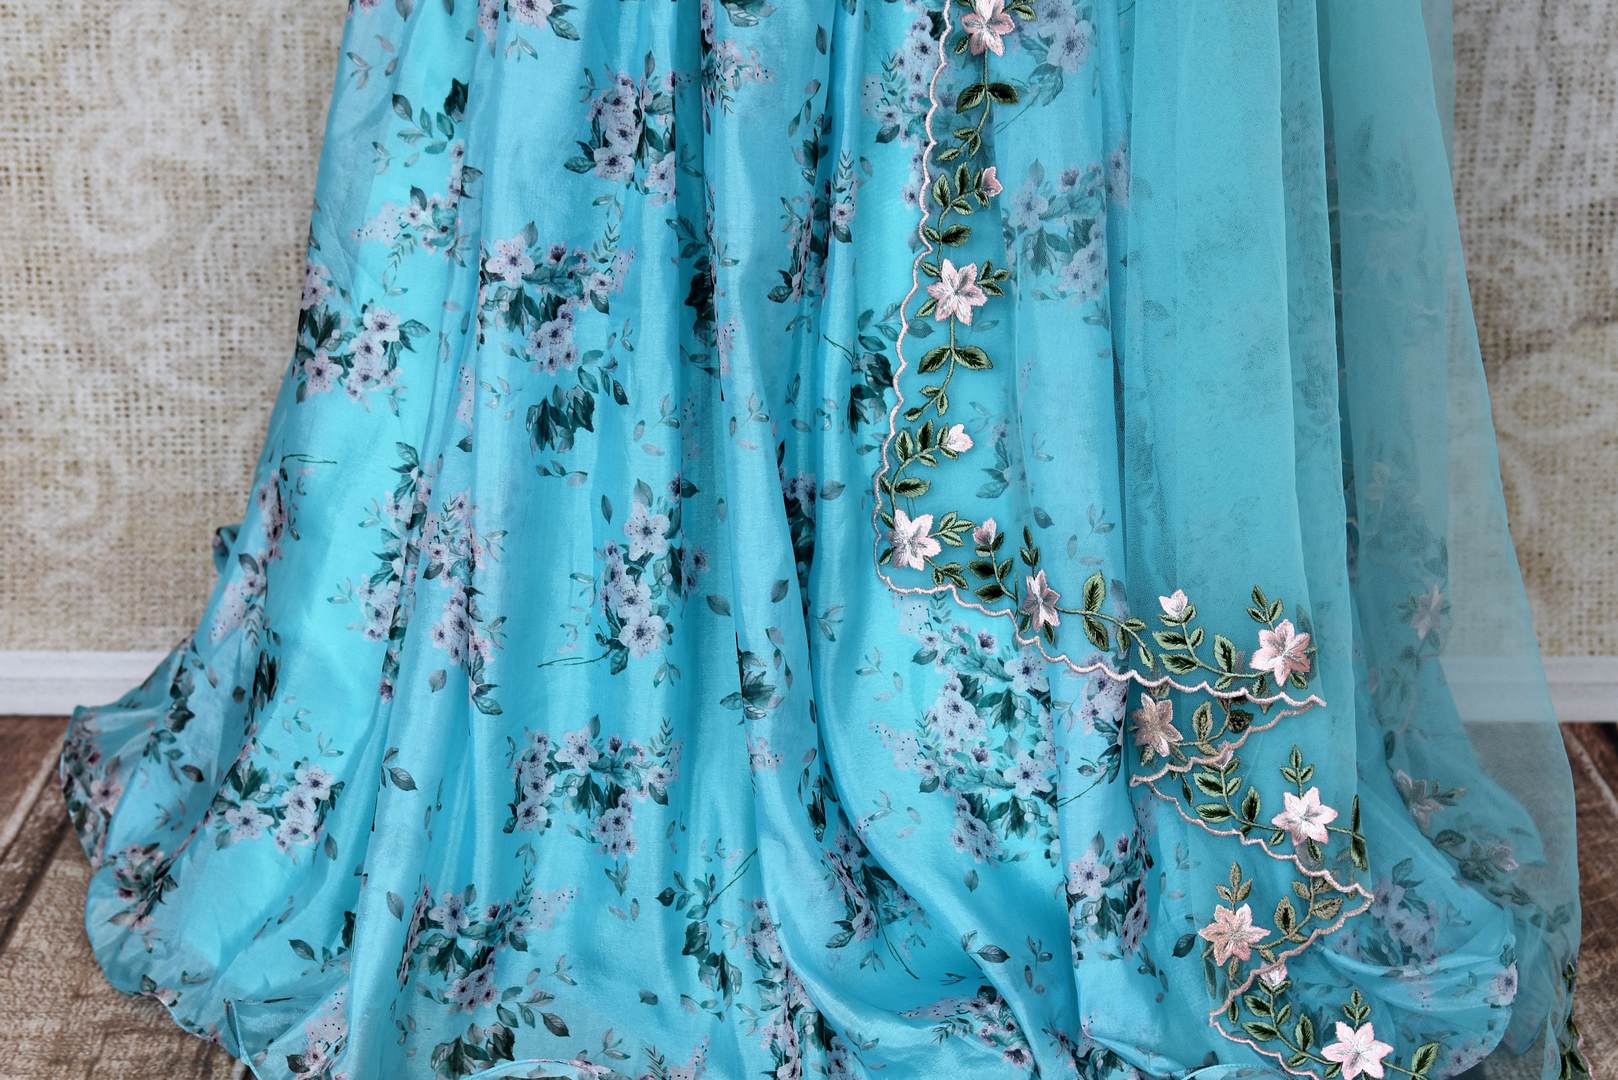 Buy blue and white floral embroidered designer lehenga online in USA with dupatta. Pick your favorite Indian clothing from a colorful collection available at Pure Elegance Indian fashion store in USA. We have an alluring range of wedding lehengas, designer Anarkali suits, gowns for Indian women in USA.-skirt